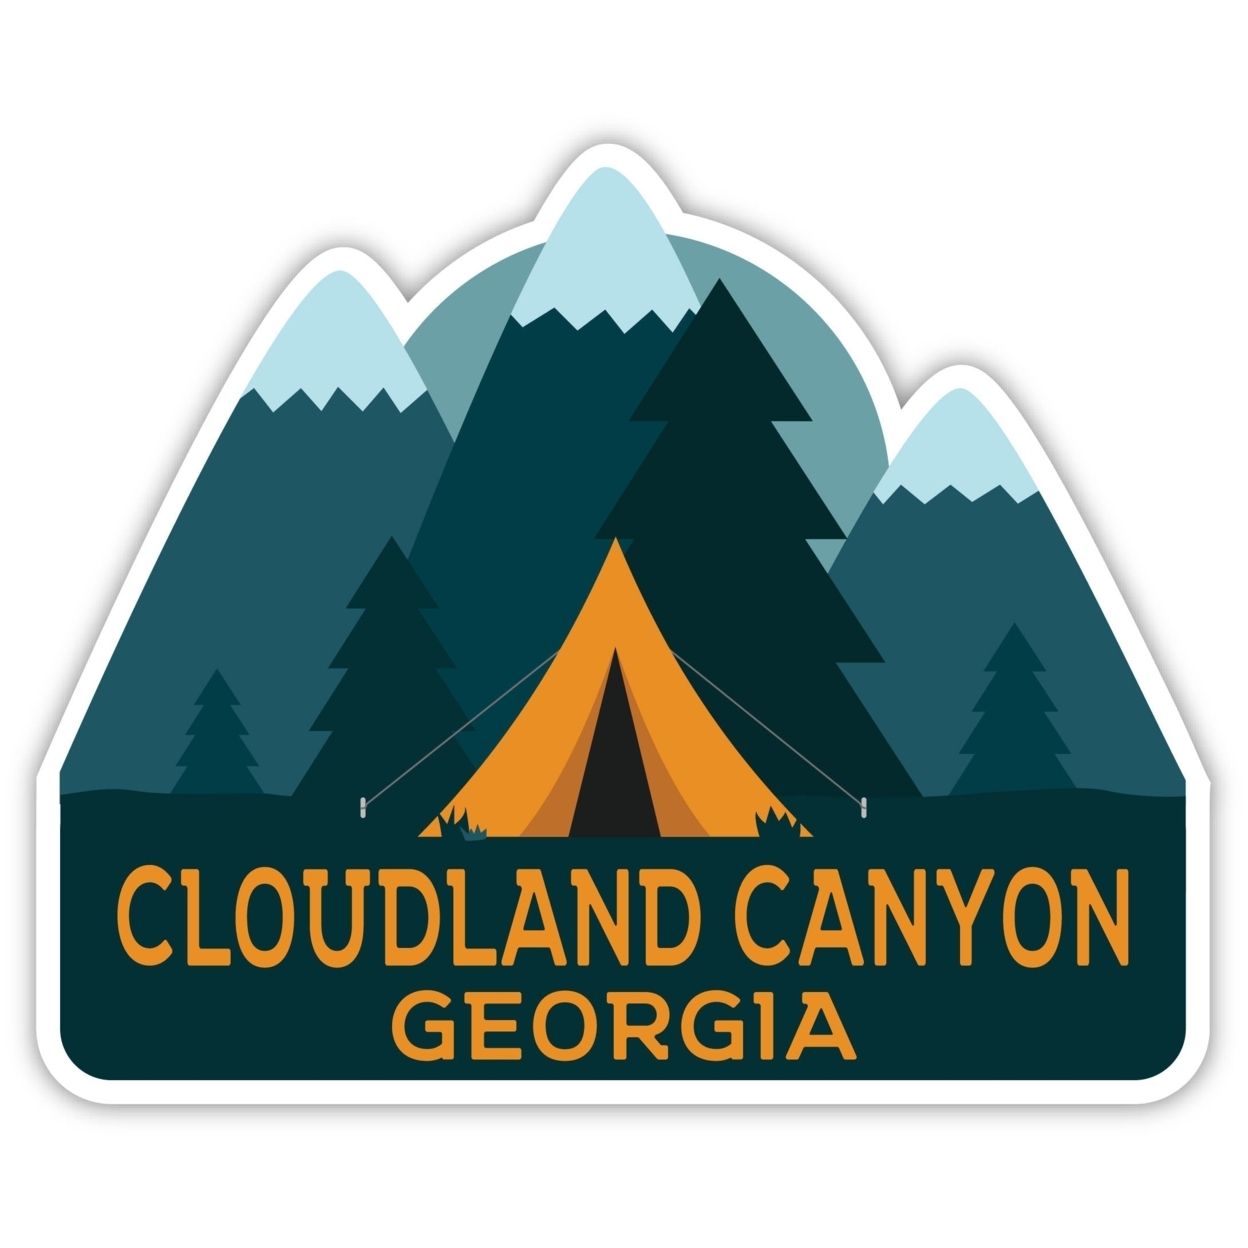 Cloudland Canyon Georgia Souvenir Decorative Stickers (Choose Theme And Size) - Single Unit, 10-Inch, Great Outdoors